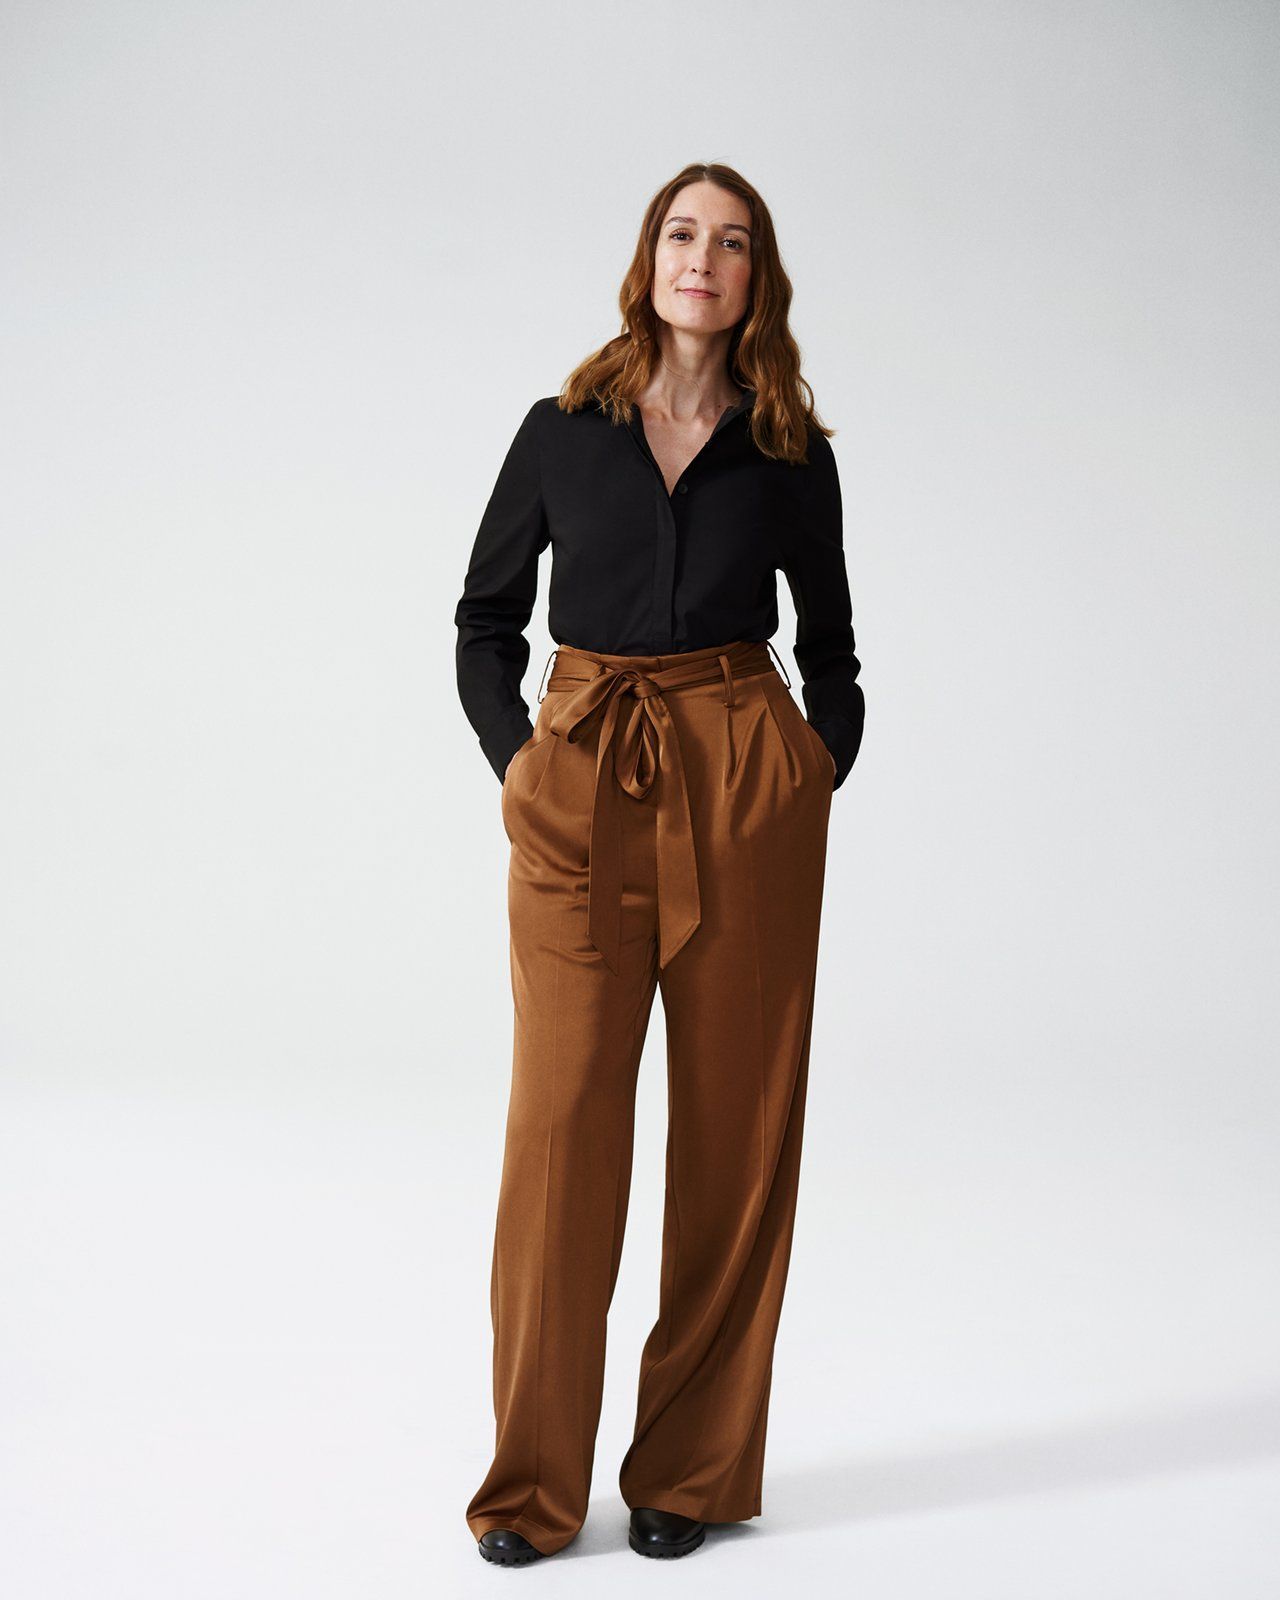 9 PlusSize Slacks To Dress Up Or Down This Fall